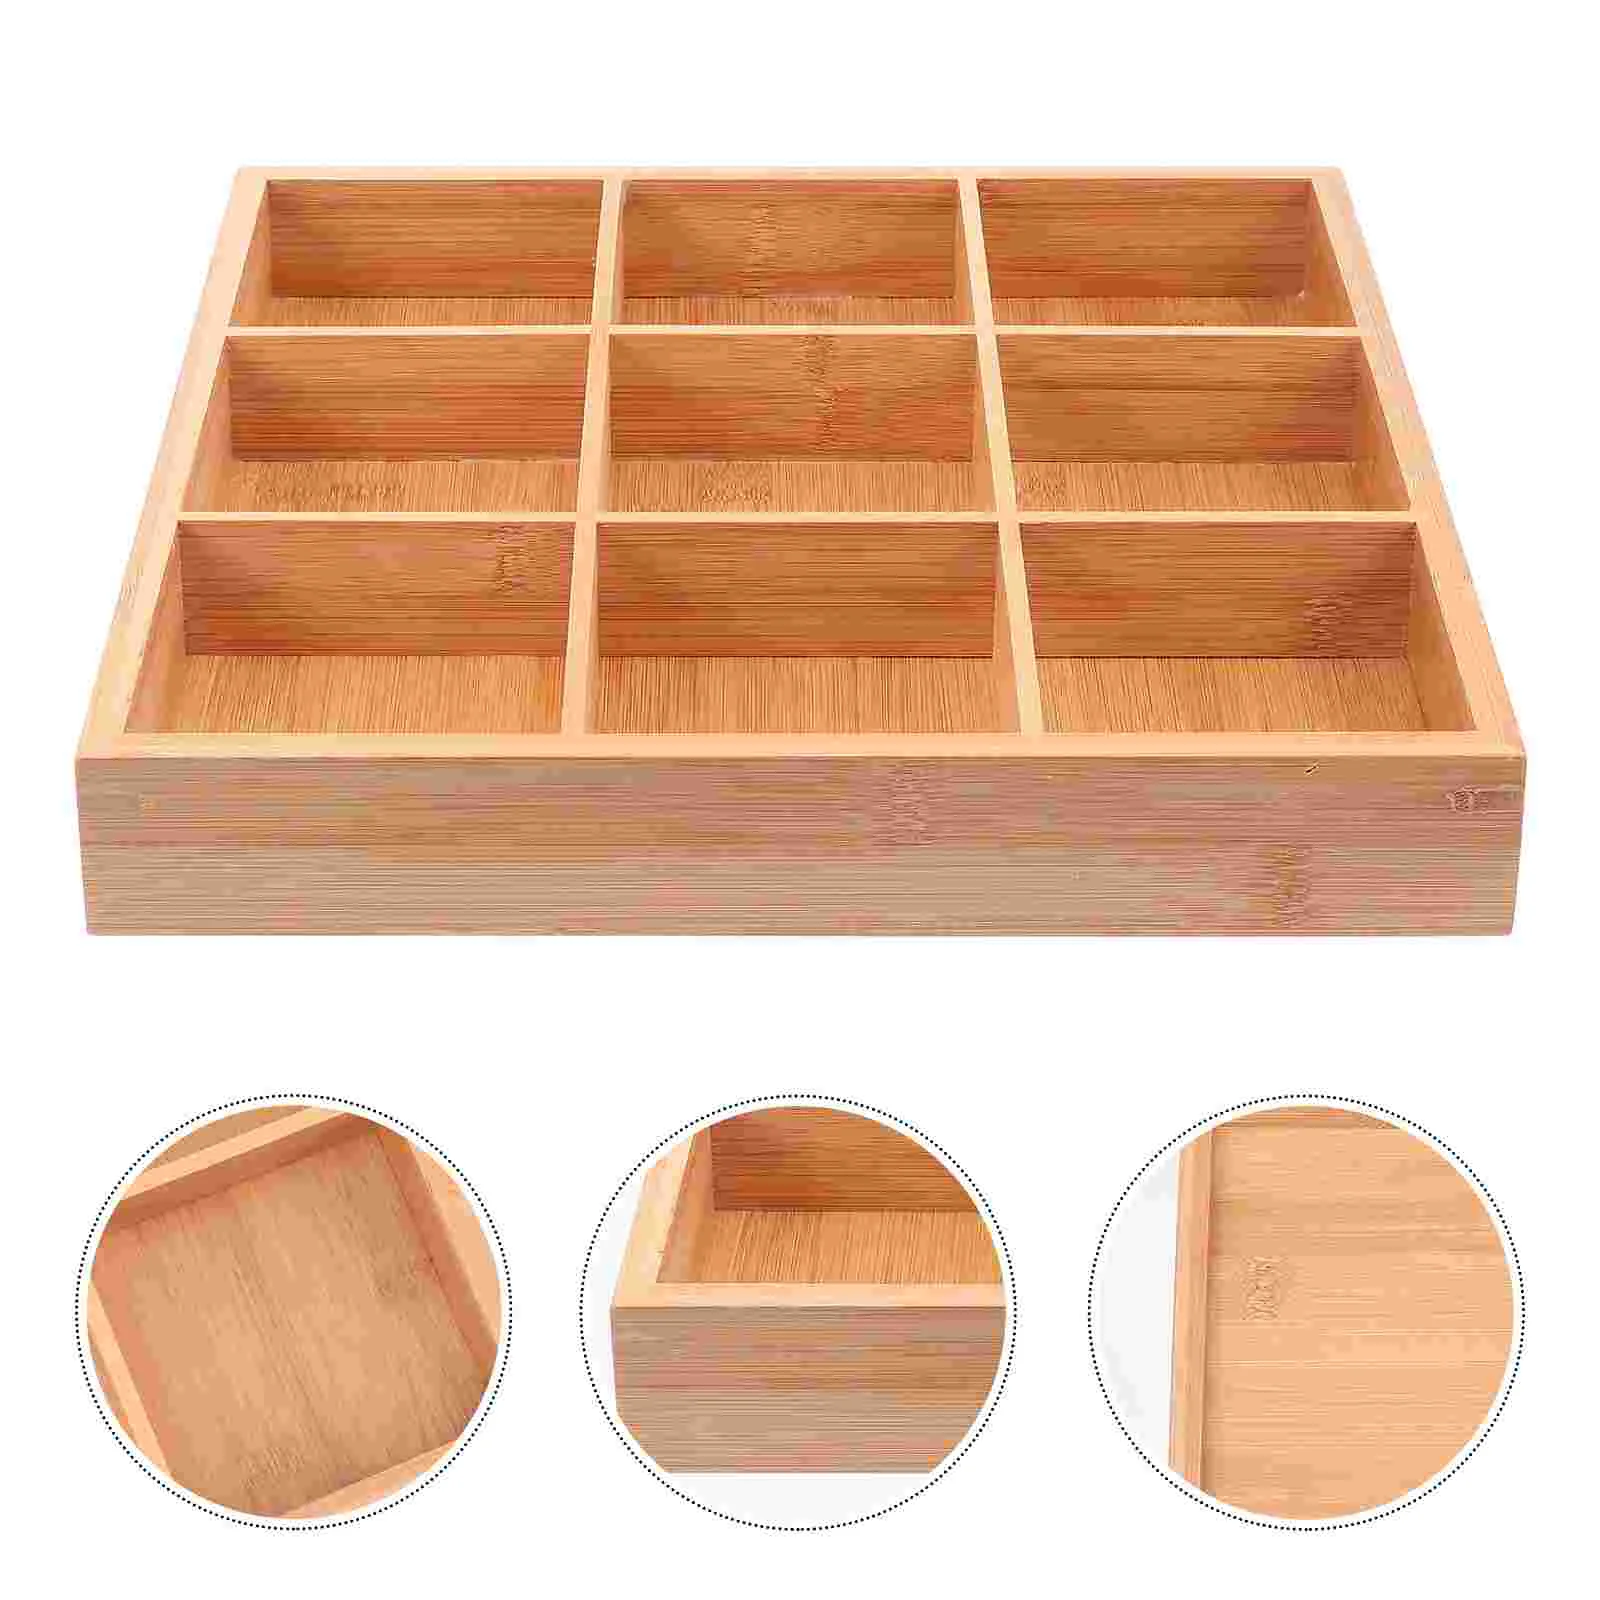 

Tray Serving Platter Divided Wood Sushi Bamboo Fruit Plate Wooden Trays Snack Plates Compartment Organizer Dishes Storage Candy